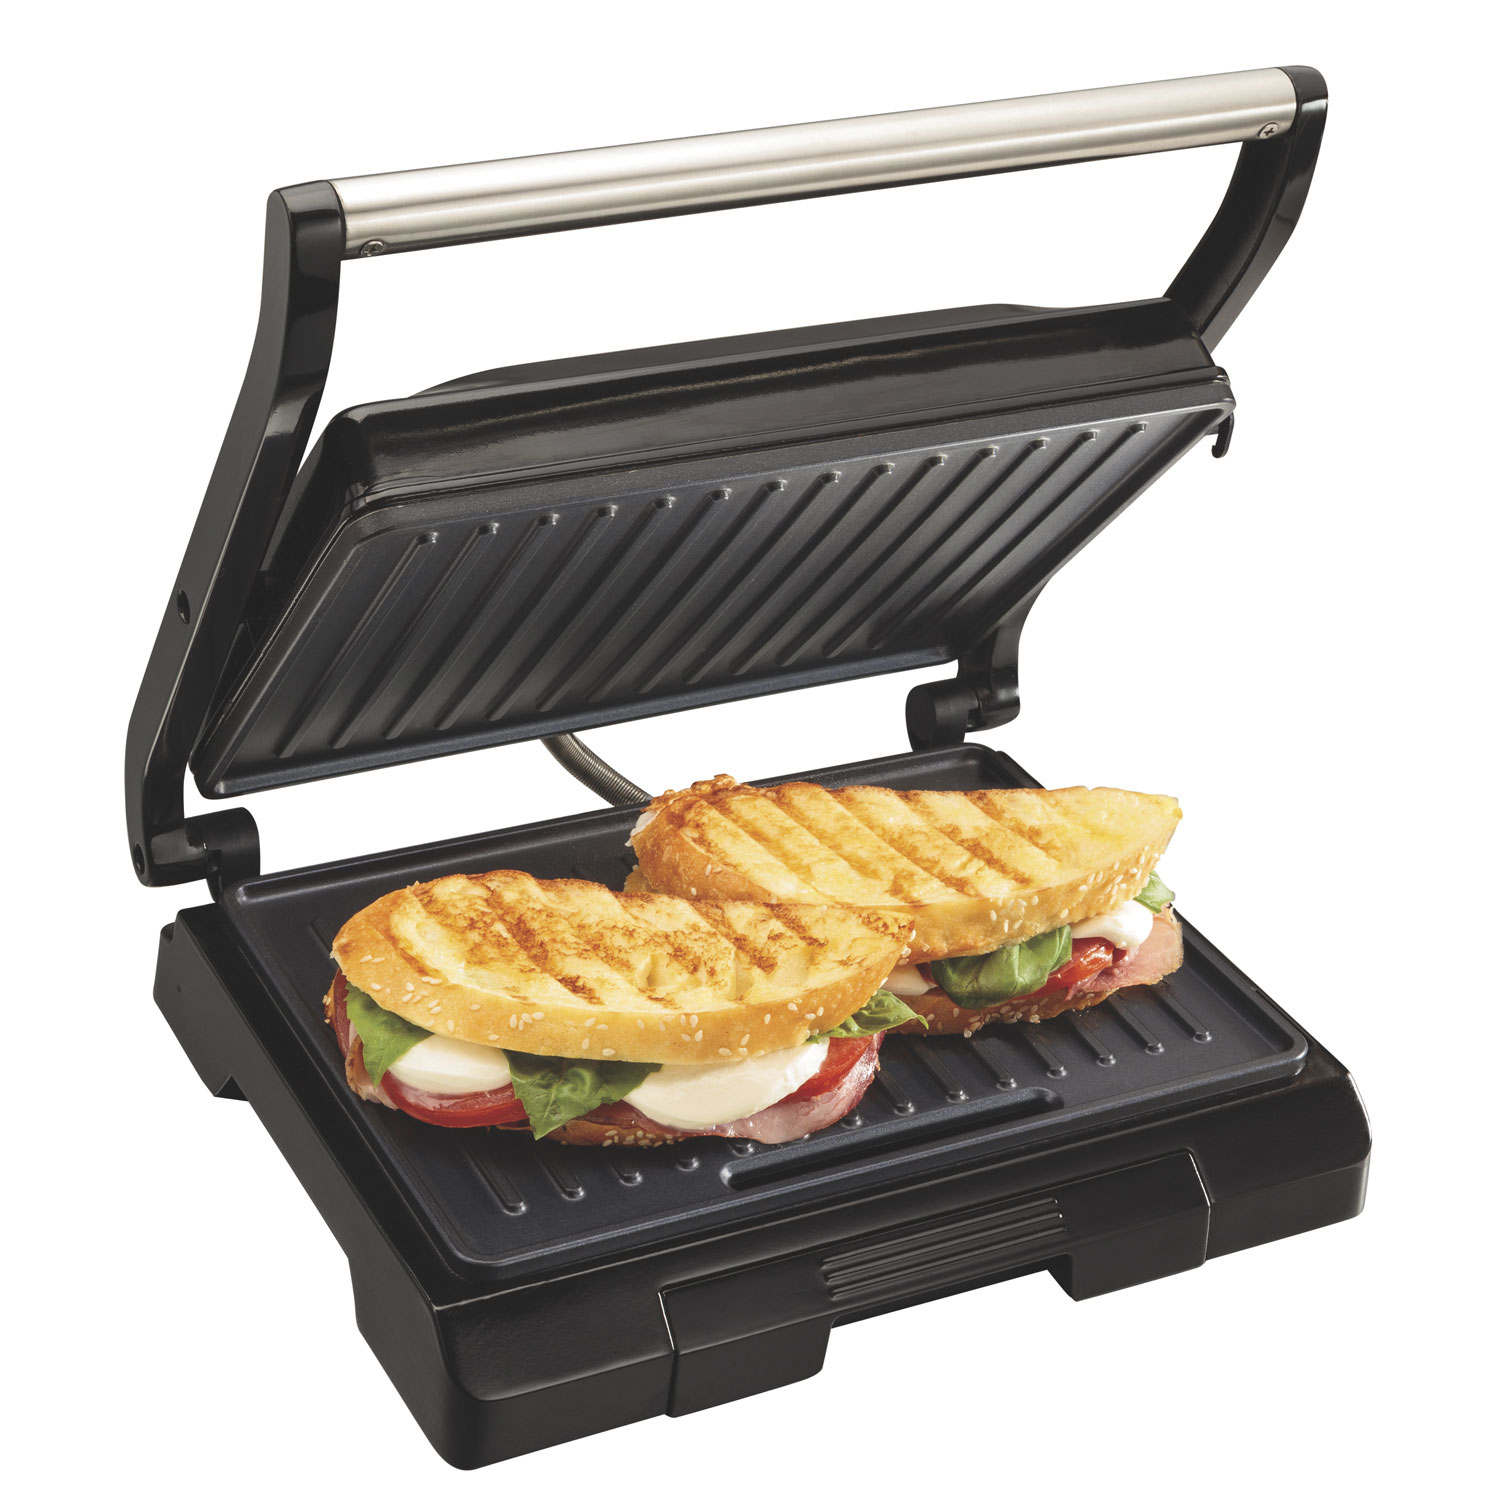 Indoor Grill & Sandwich Maker Buying Guide